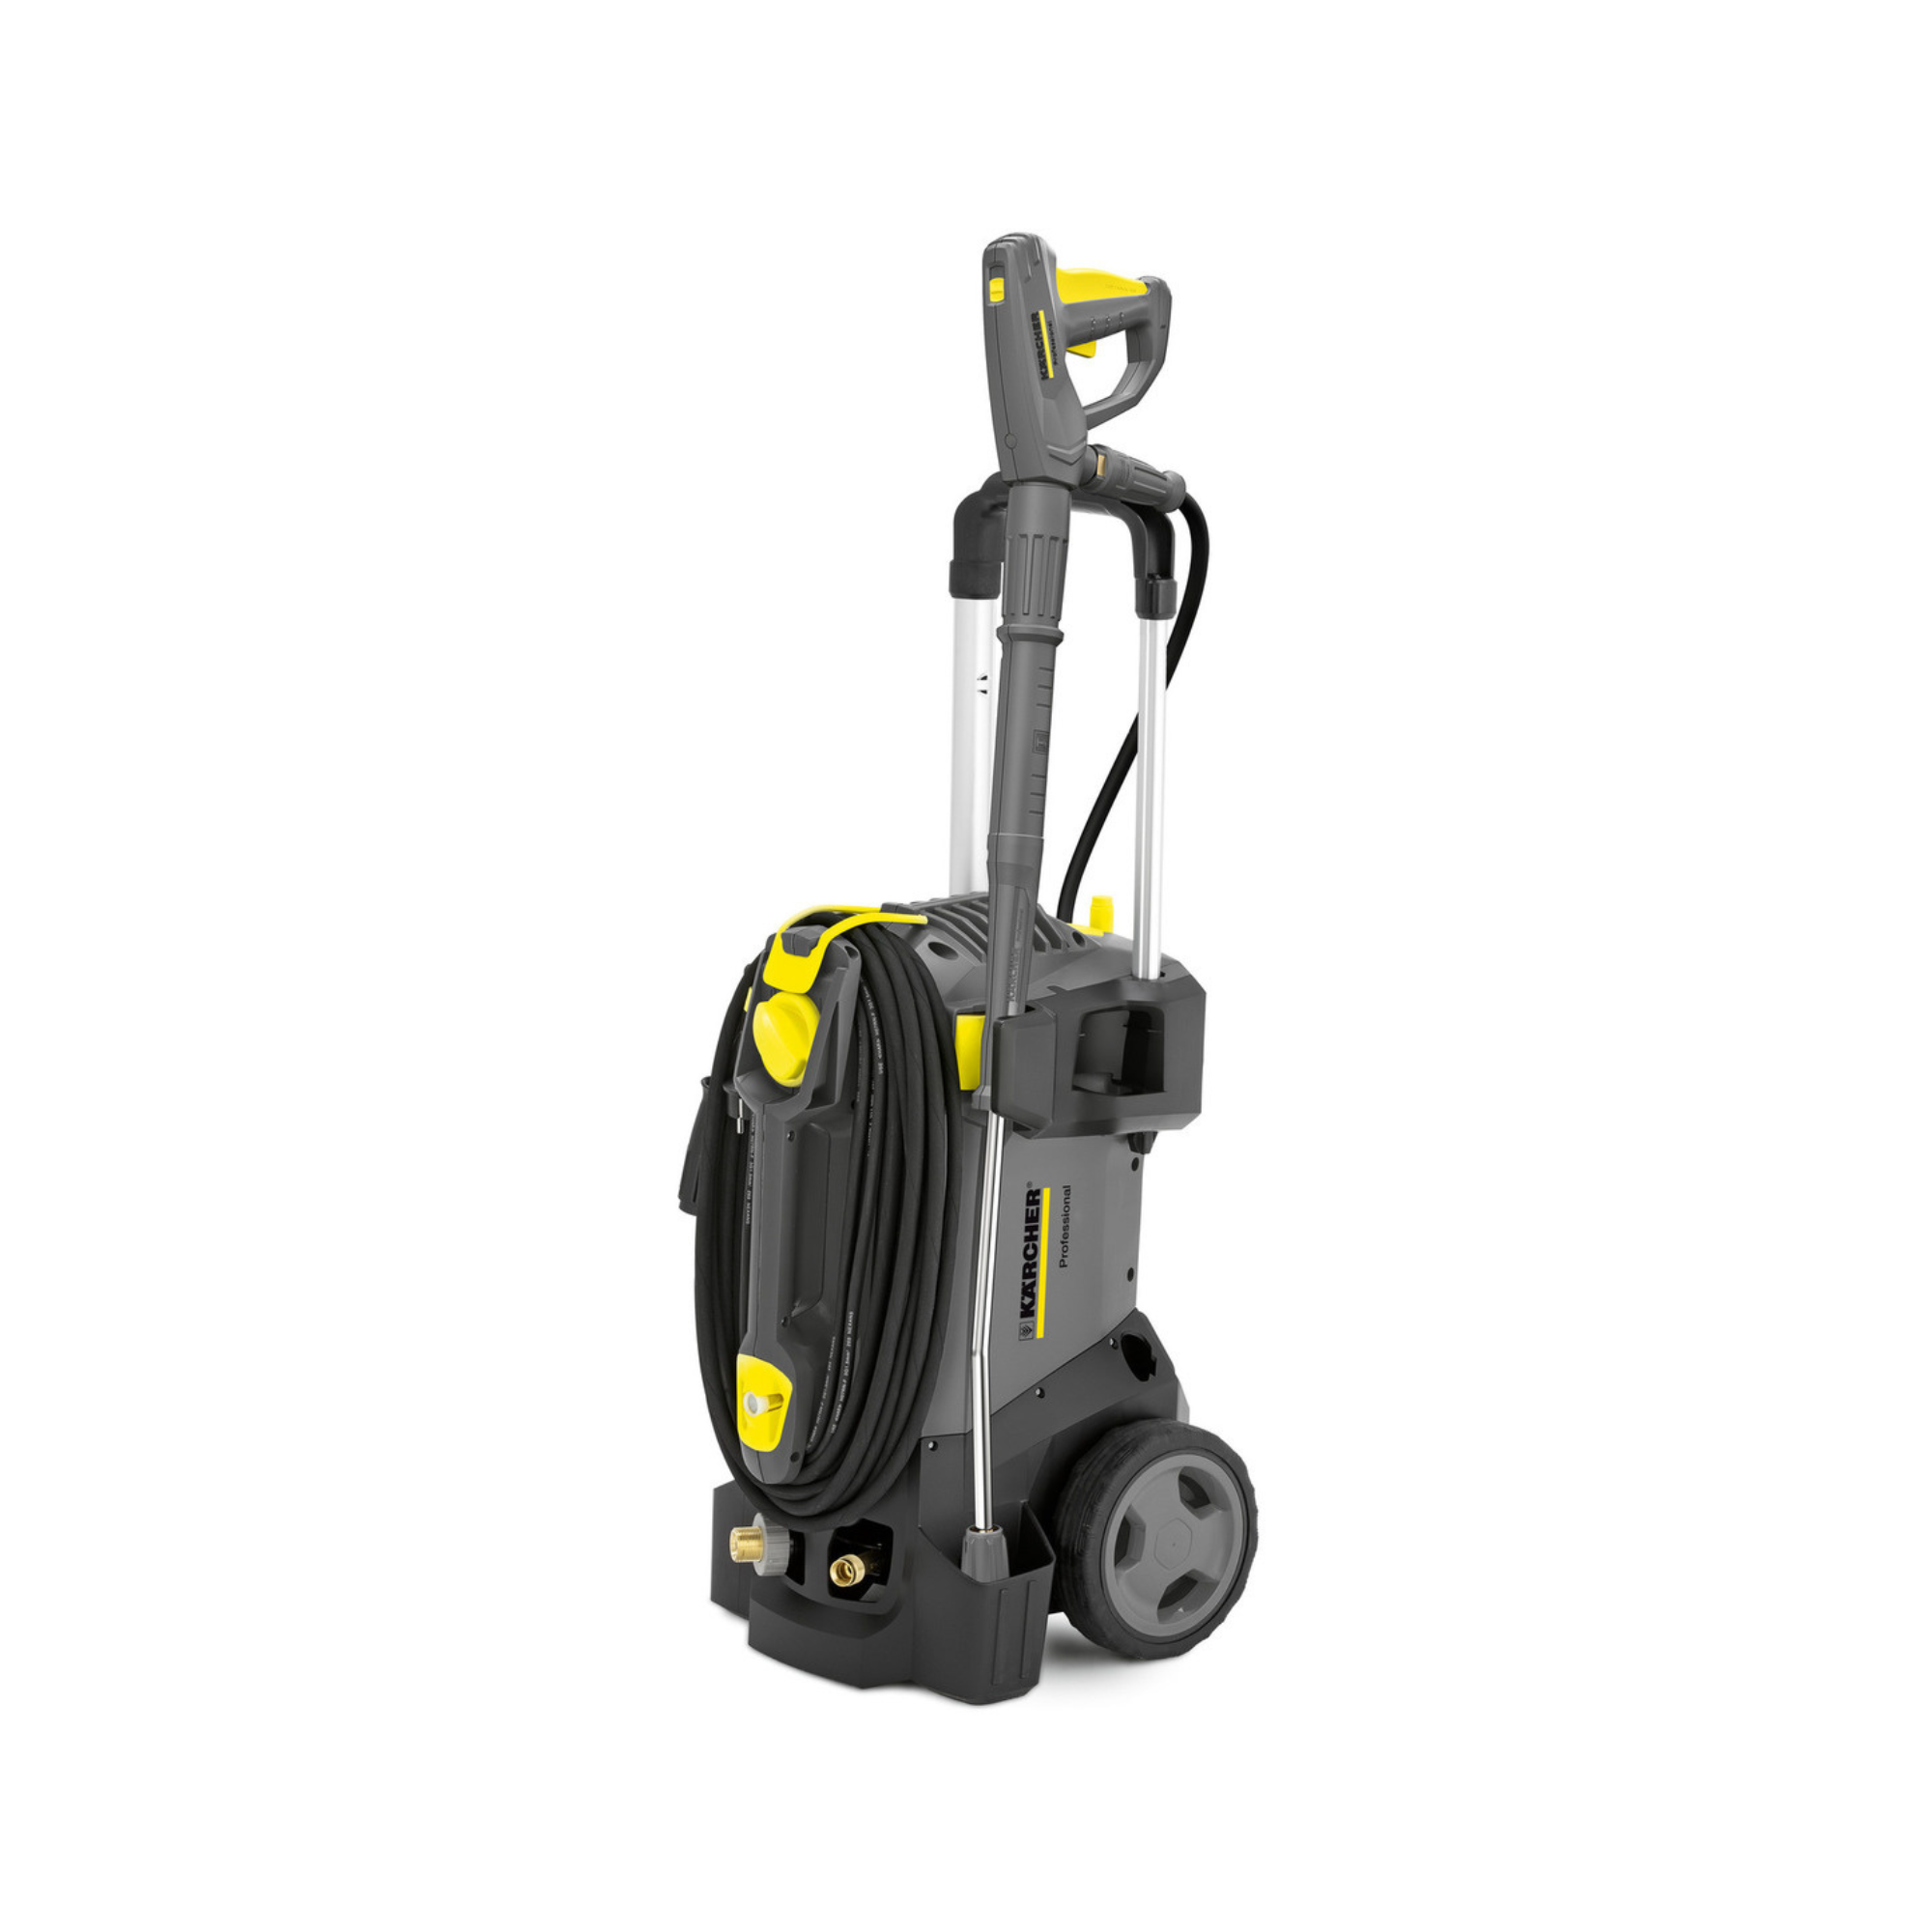 Karcher Cold water Compact Pressure washer.